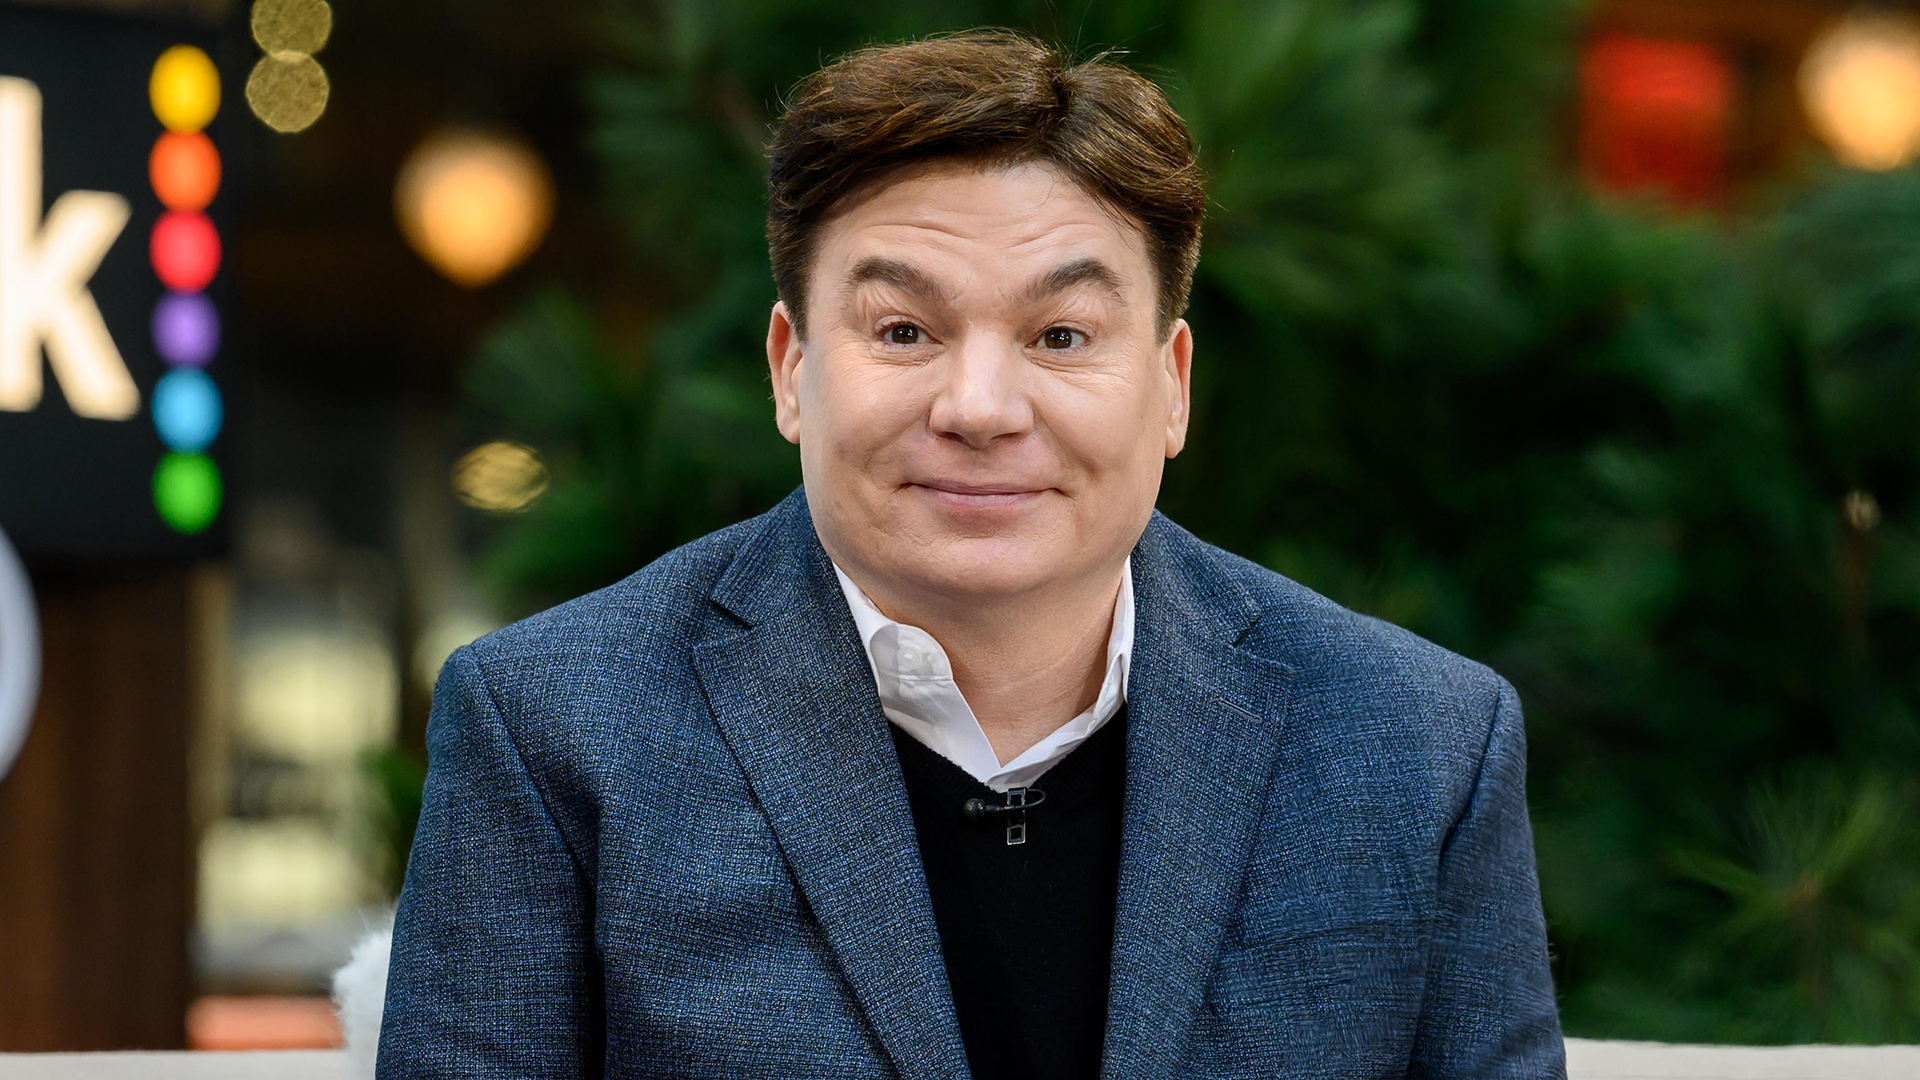 mike Myers On Playing Dr Evil In Super Bowl Ad Teases Possibility Of 4th Austin Powers Movie